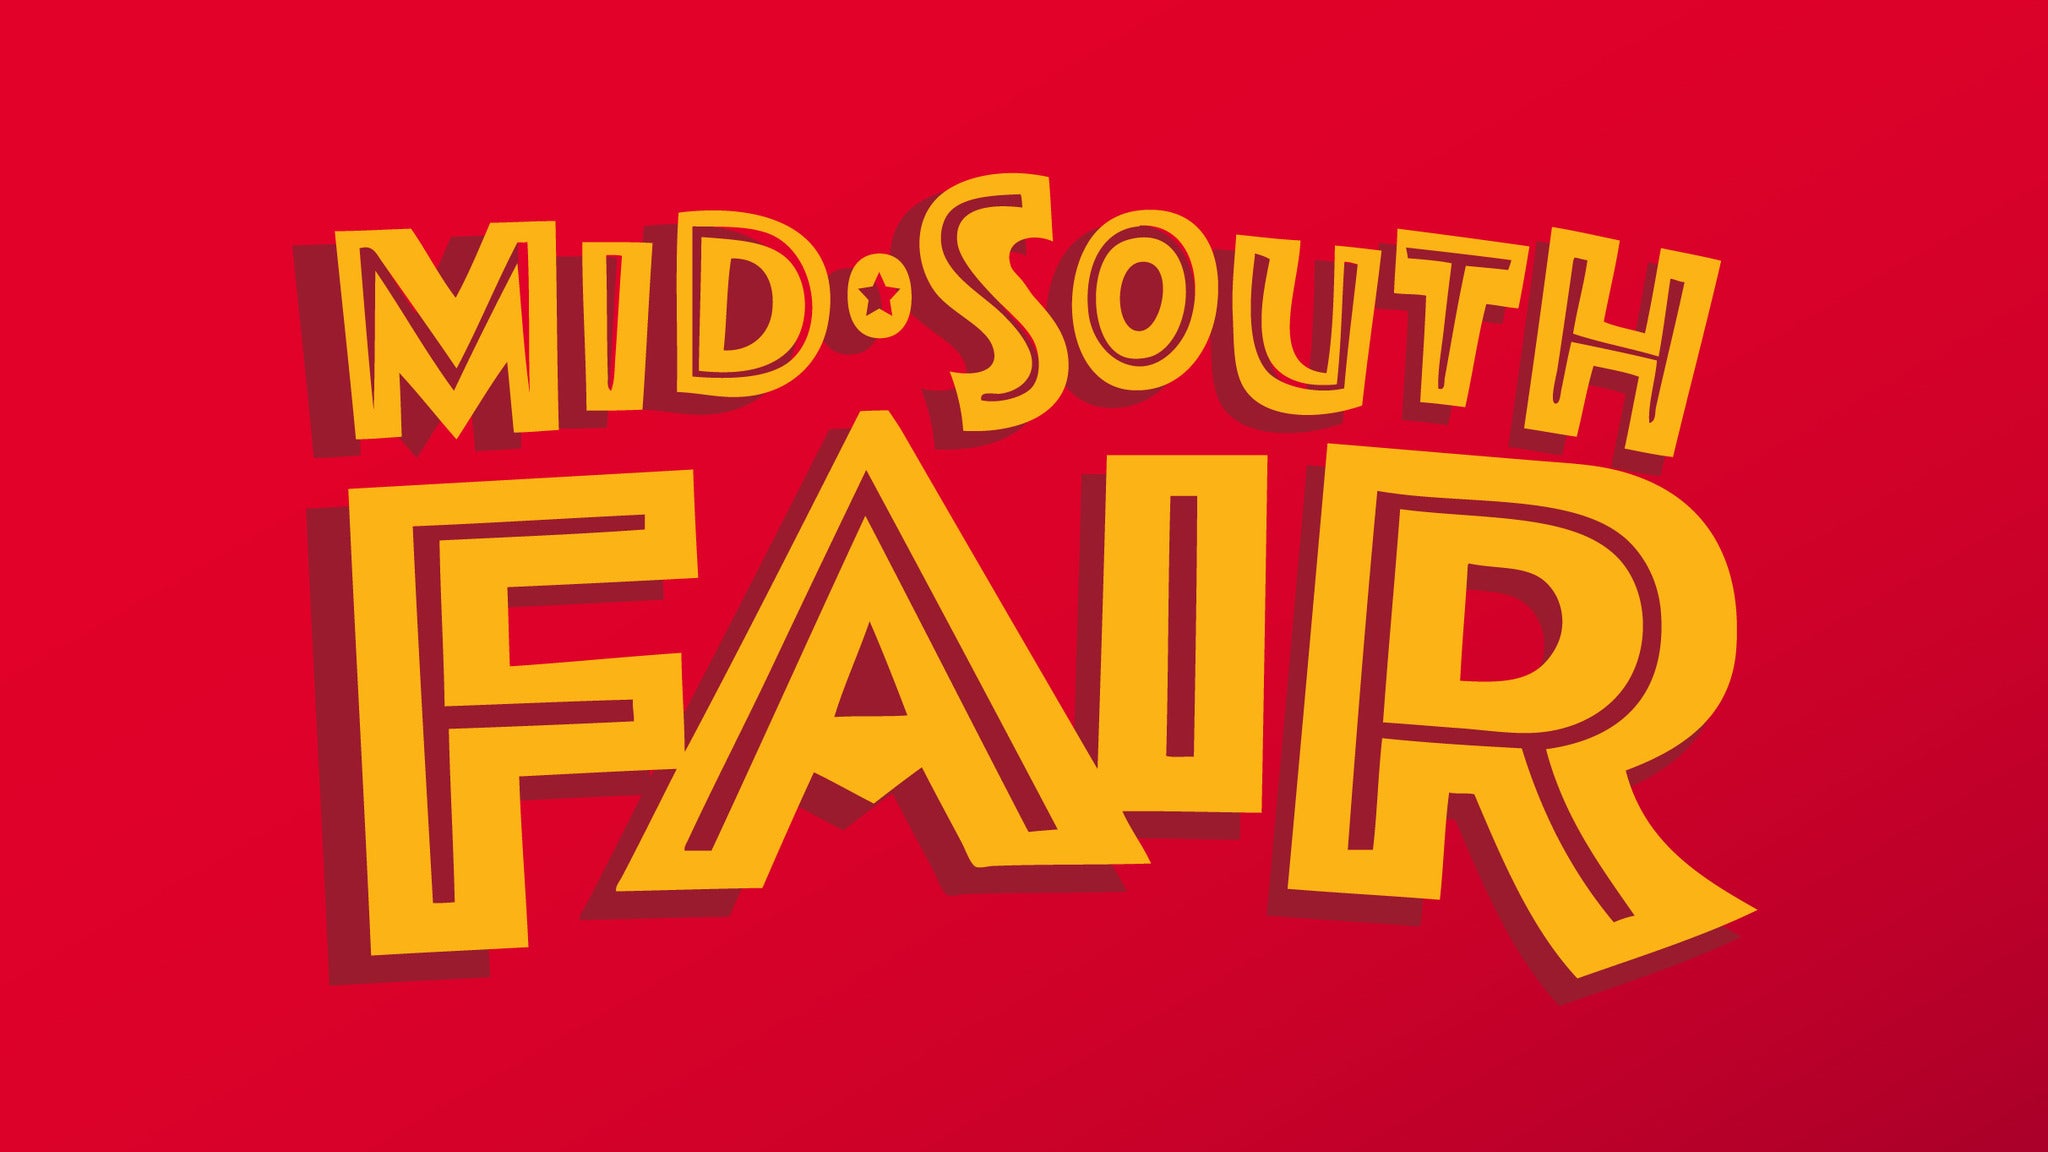 Mid-South Fair, September 24-October 3, 2021 in Southaven promo photo for 50% Discount presale offer code